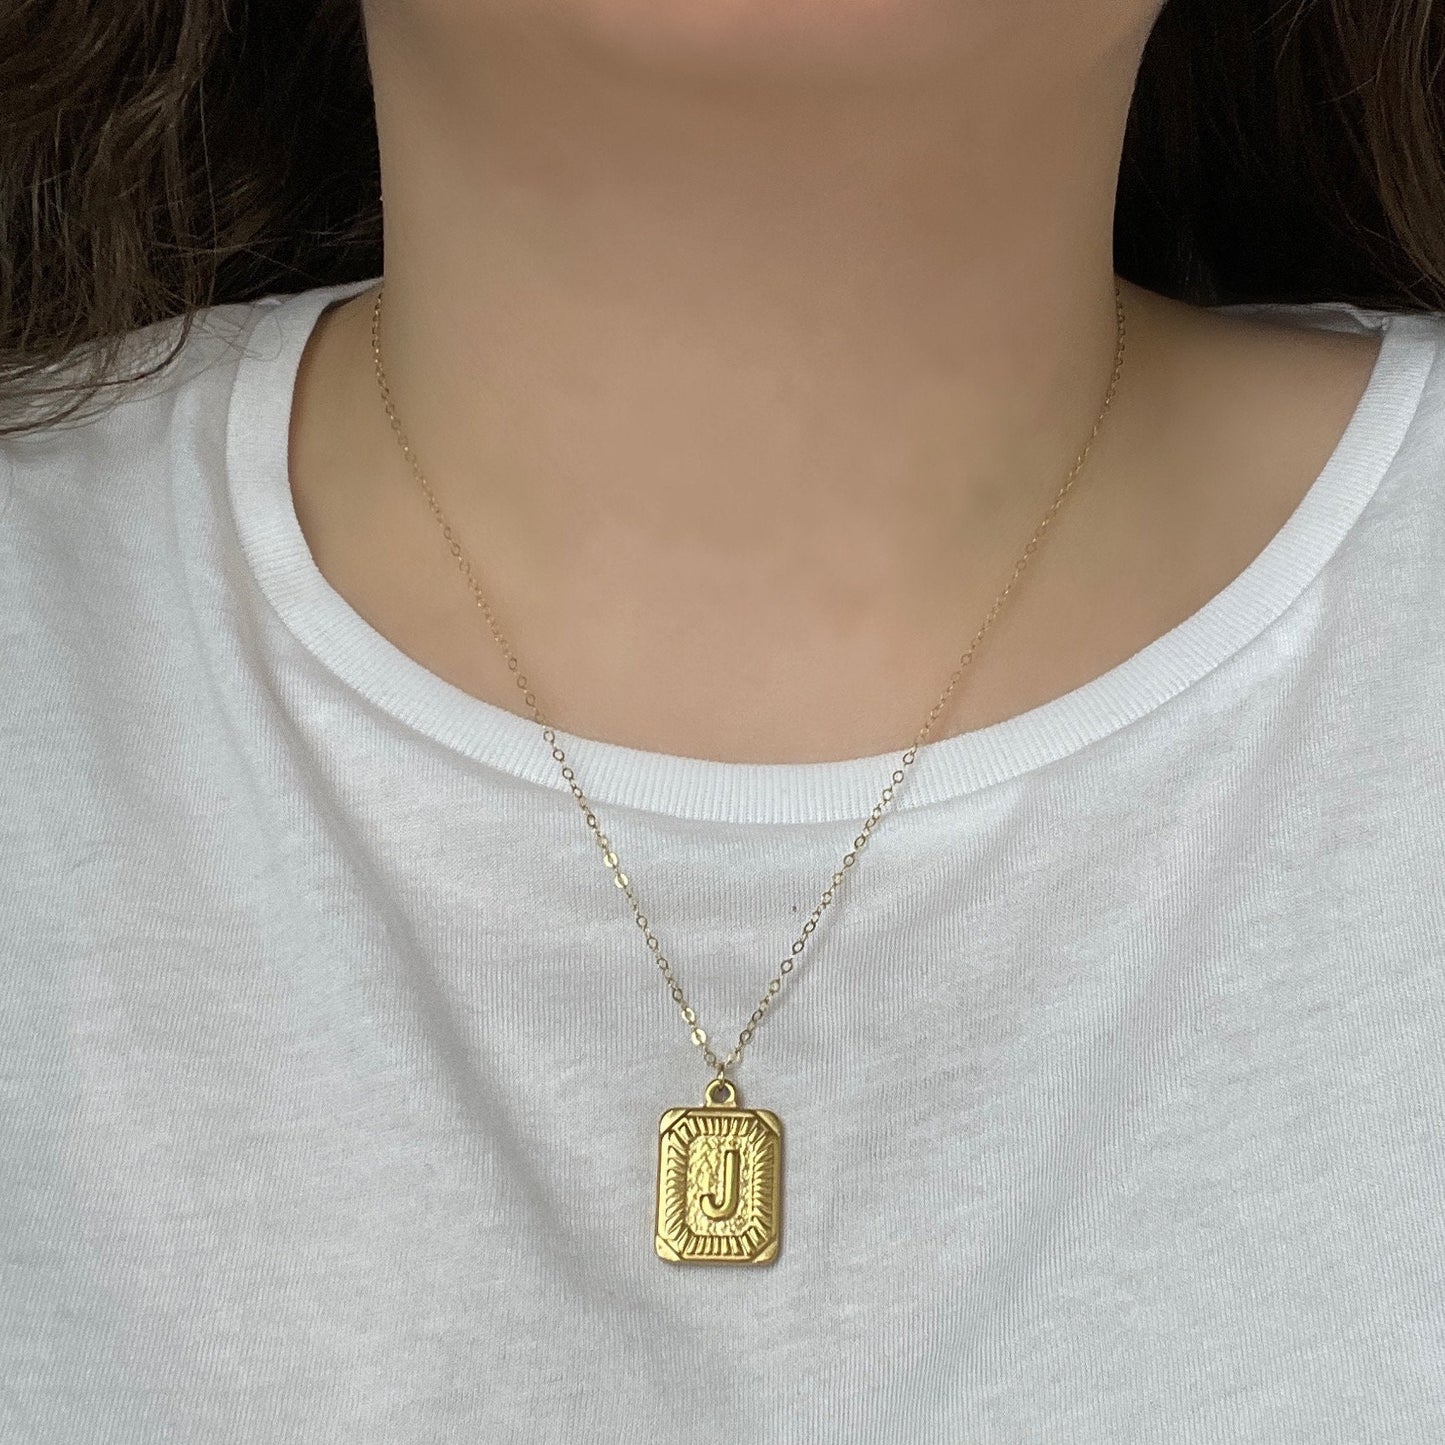 Large Tag Necklace Gold, Initial Charm, Tag Initial Pendant, 18K Stainless Steel or 14K Gold Filled, Personalized Layering Women, M6-133